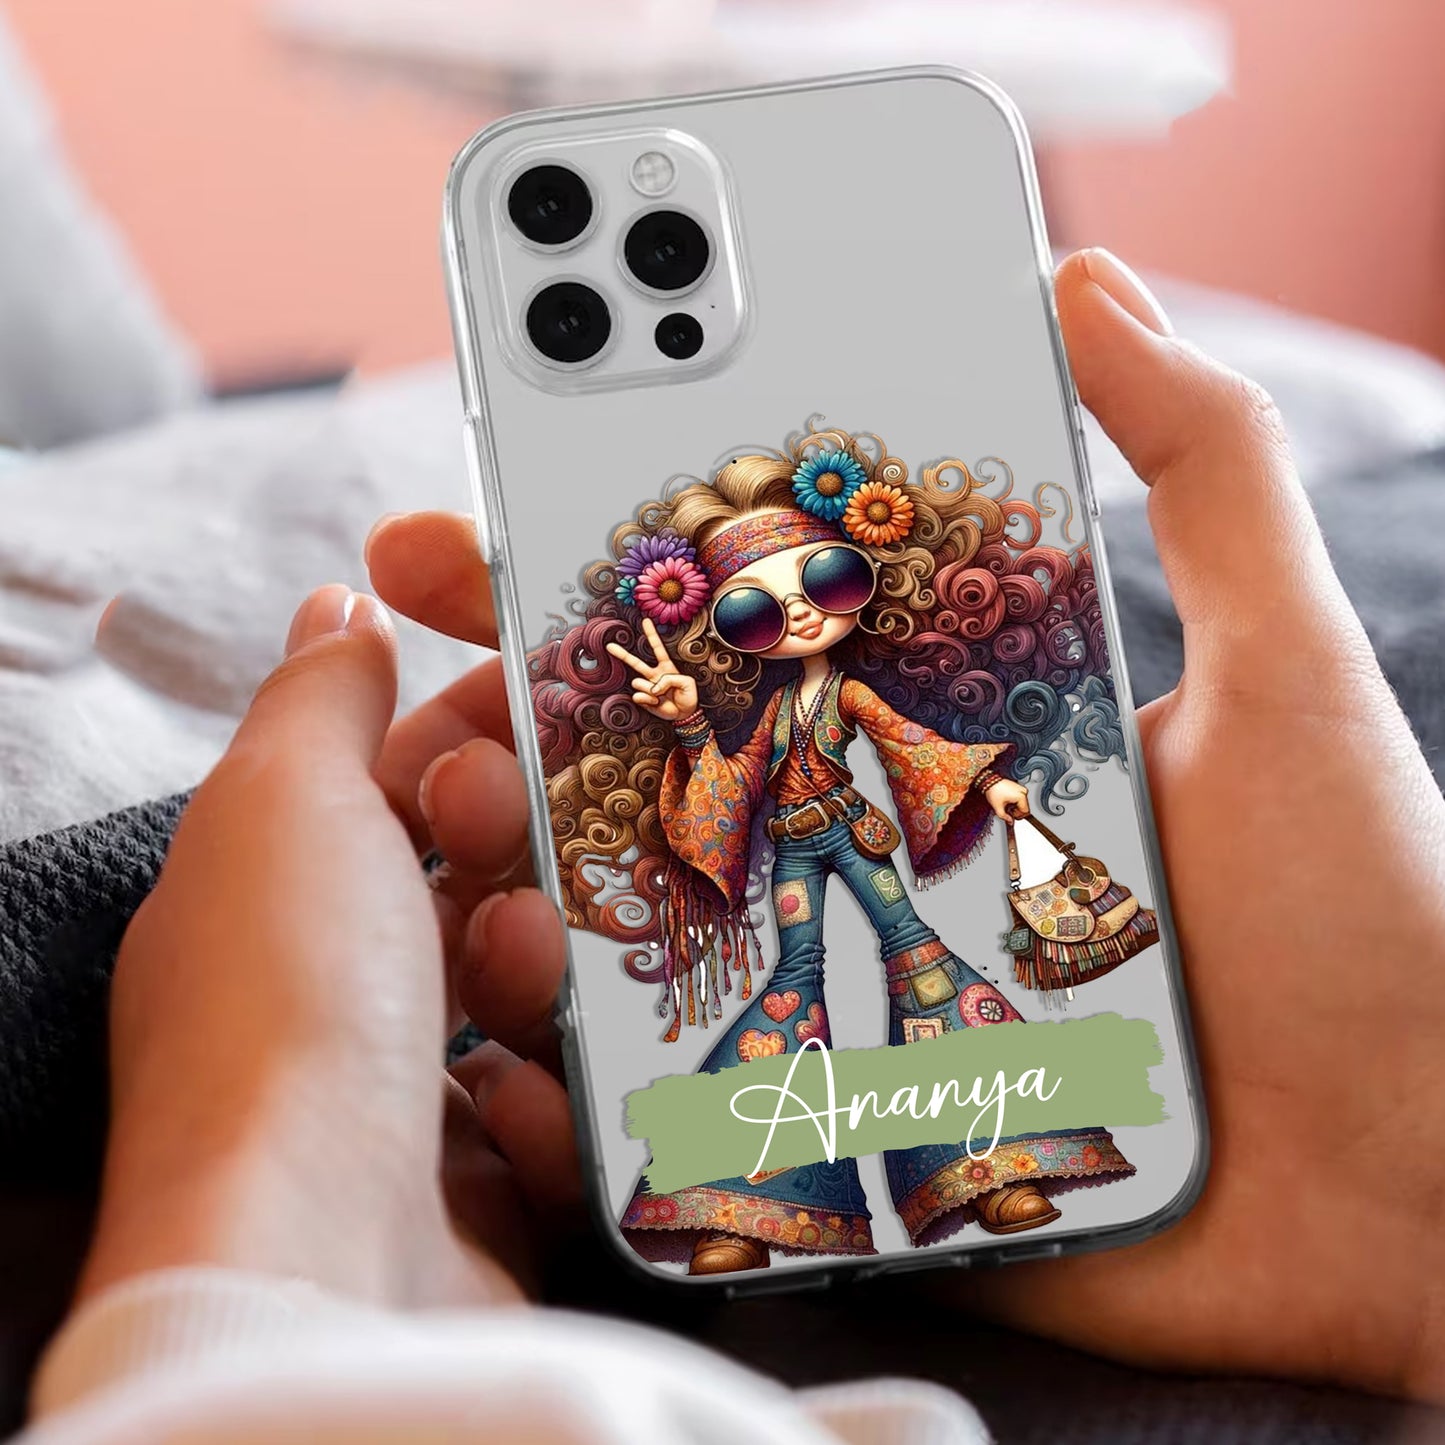 Ranngers Girl Customize Transparent Silicon Case For iPhone